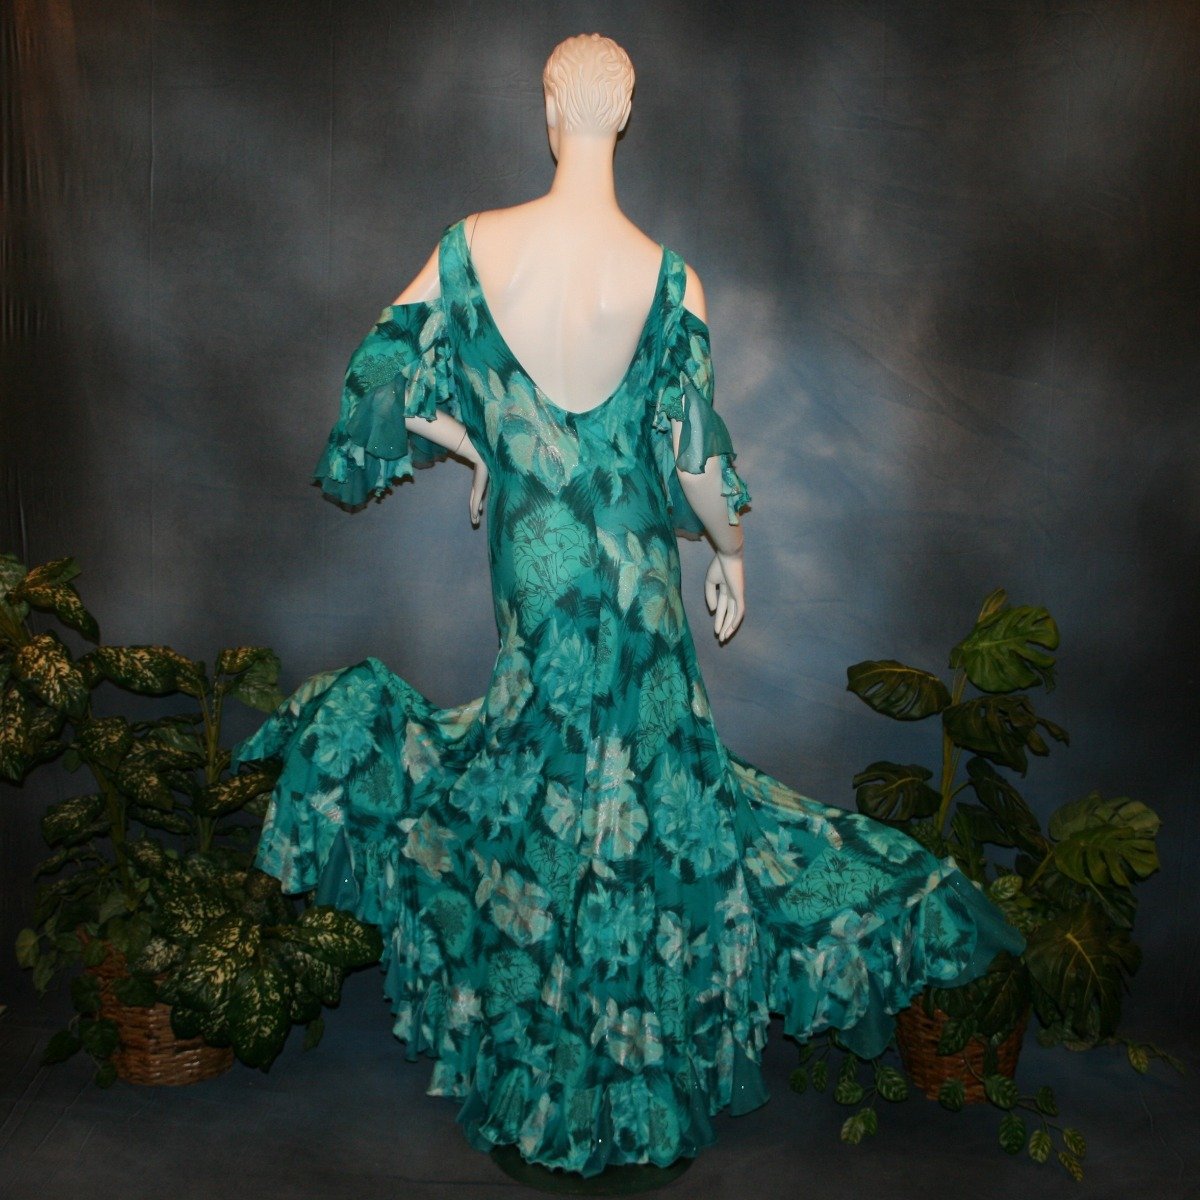 back view of Gorgeous teal tropical print social ballroom dress created in tropical lycra print in shades of teal with a bit of silver sheen accents...absolutely gorgeous fabric! This social ballroom dress features very full skirting with 2 slits & oodles of flounces of the same teal tropical print lycra with intermittent flounces of teal glitter chiffon...along with draping, cold shoulder flounce sleeves...and a low back